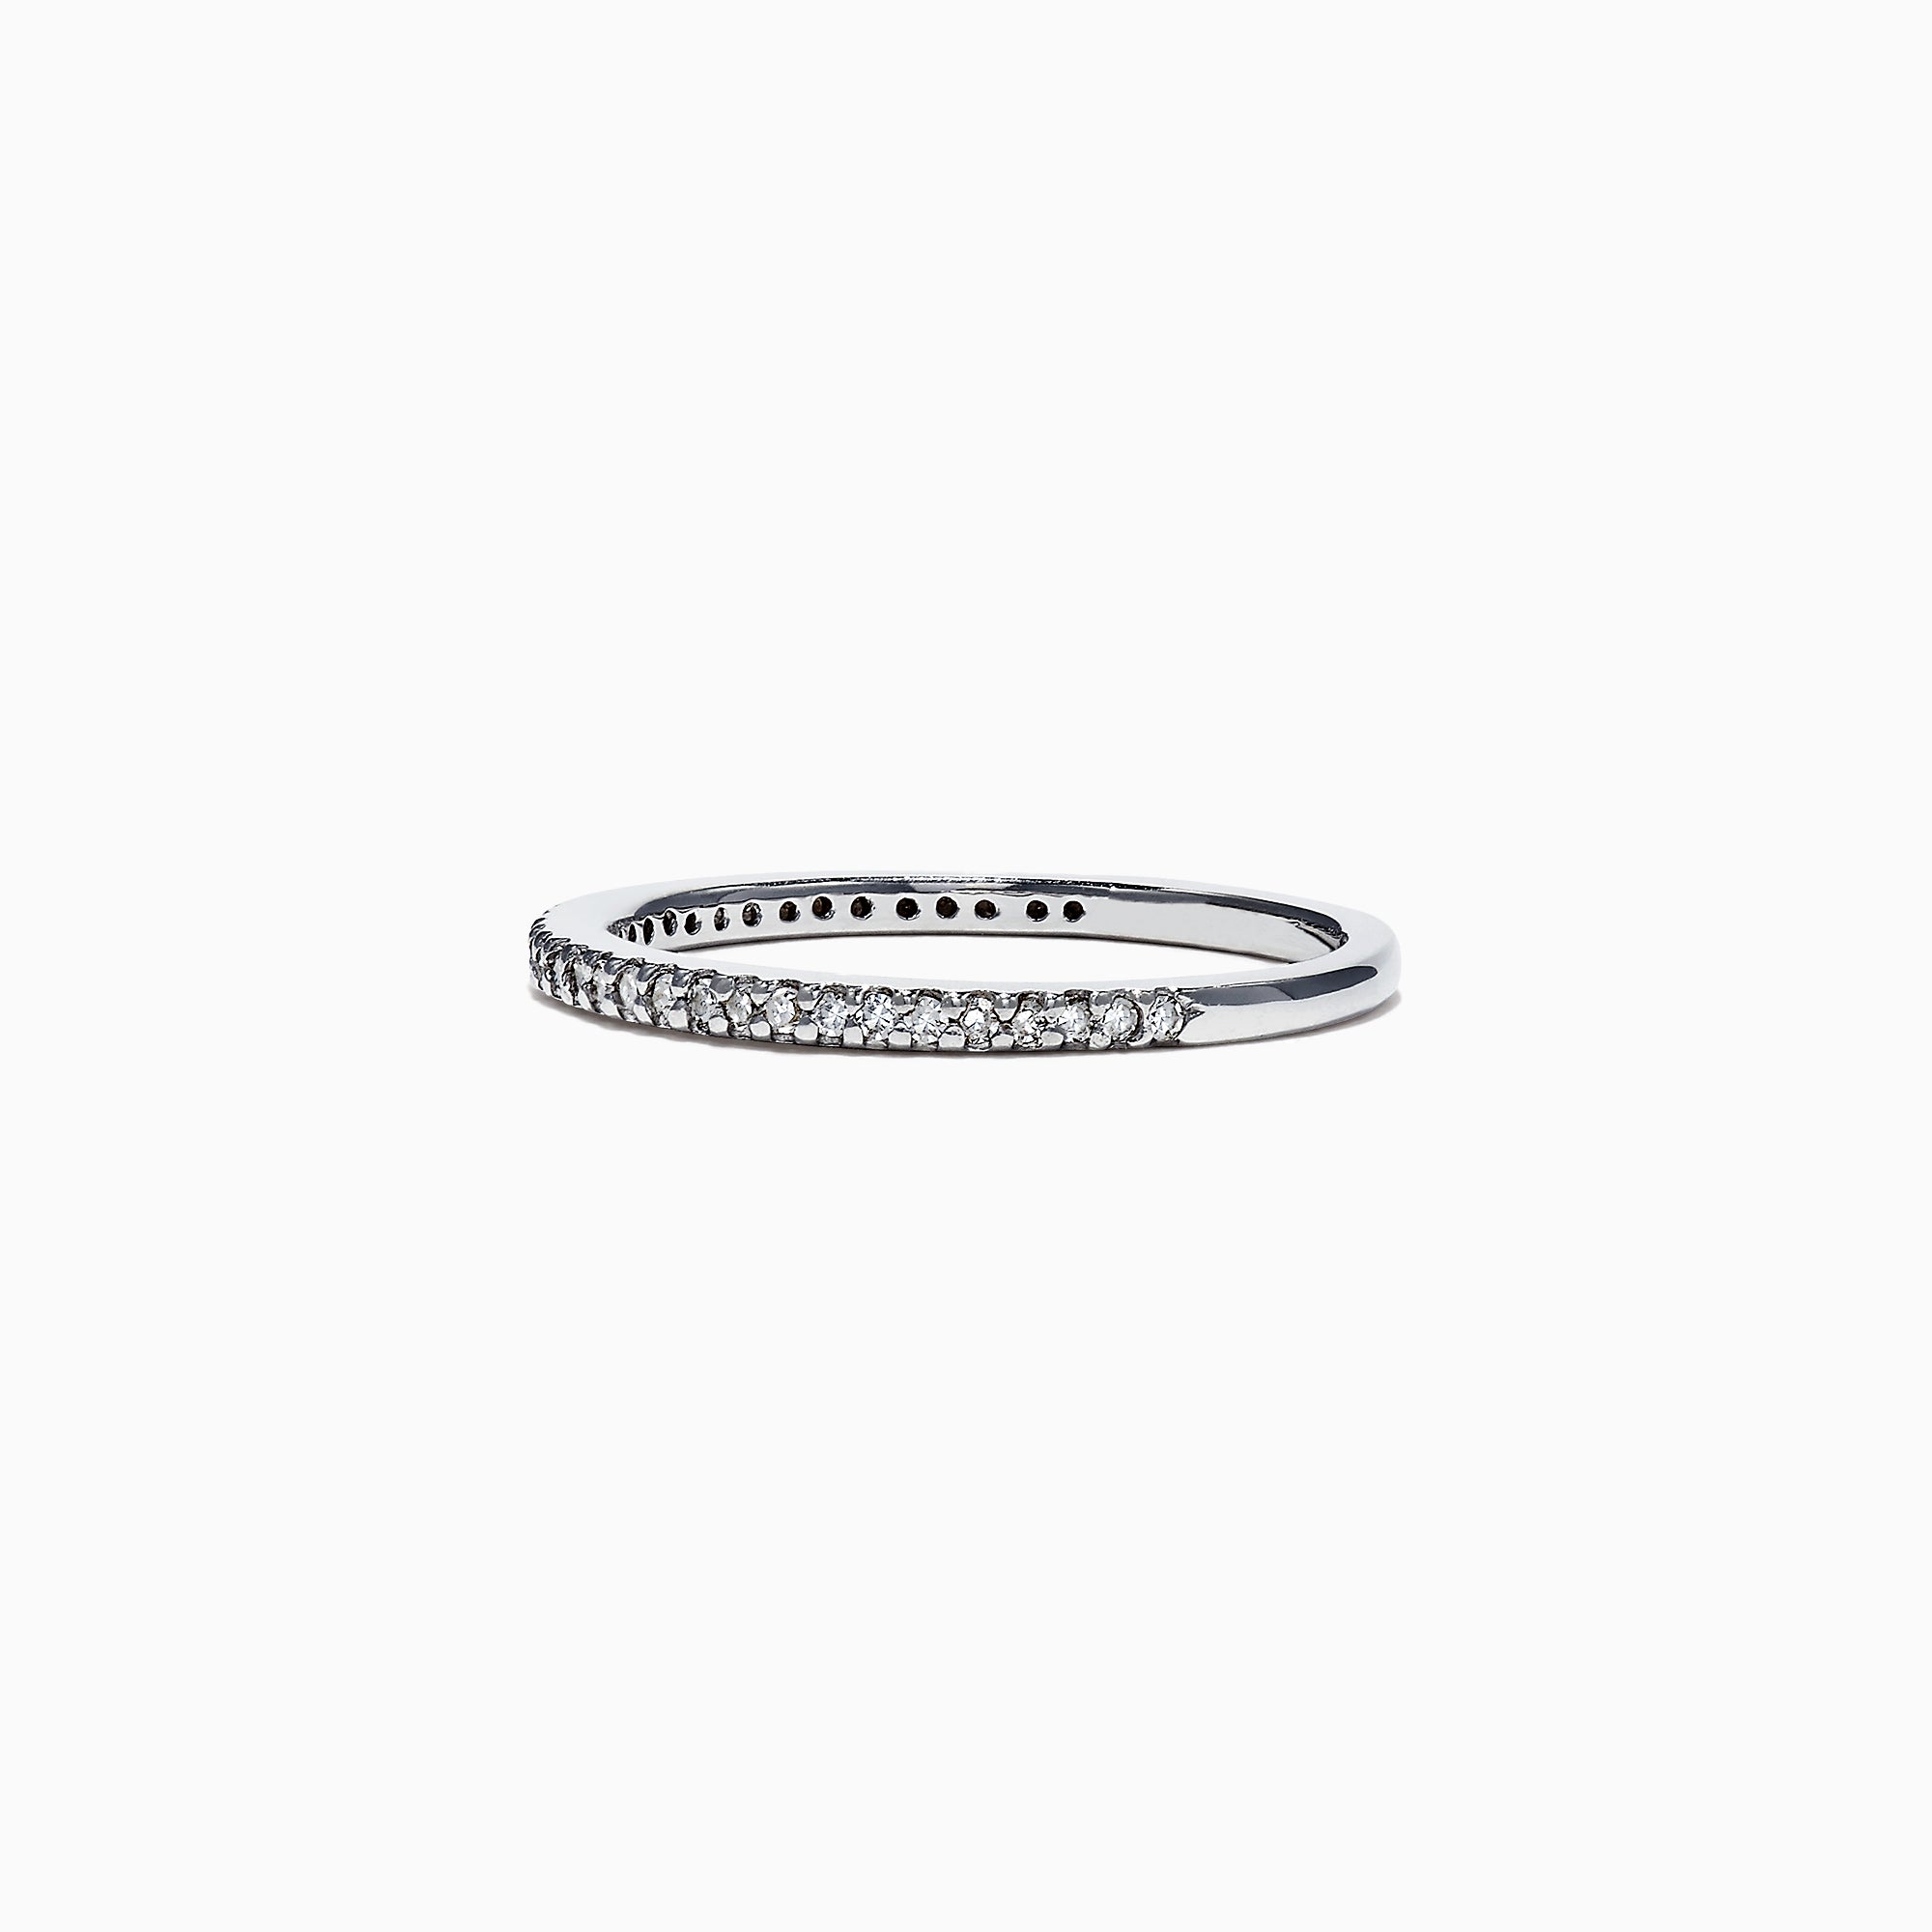 Effy Pave Classica 14K White Gold Double Band Diamond Ring, 0.36 TCW ...